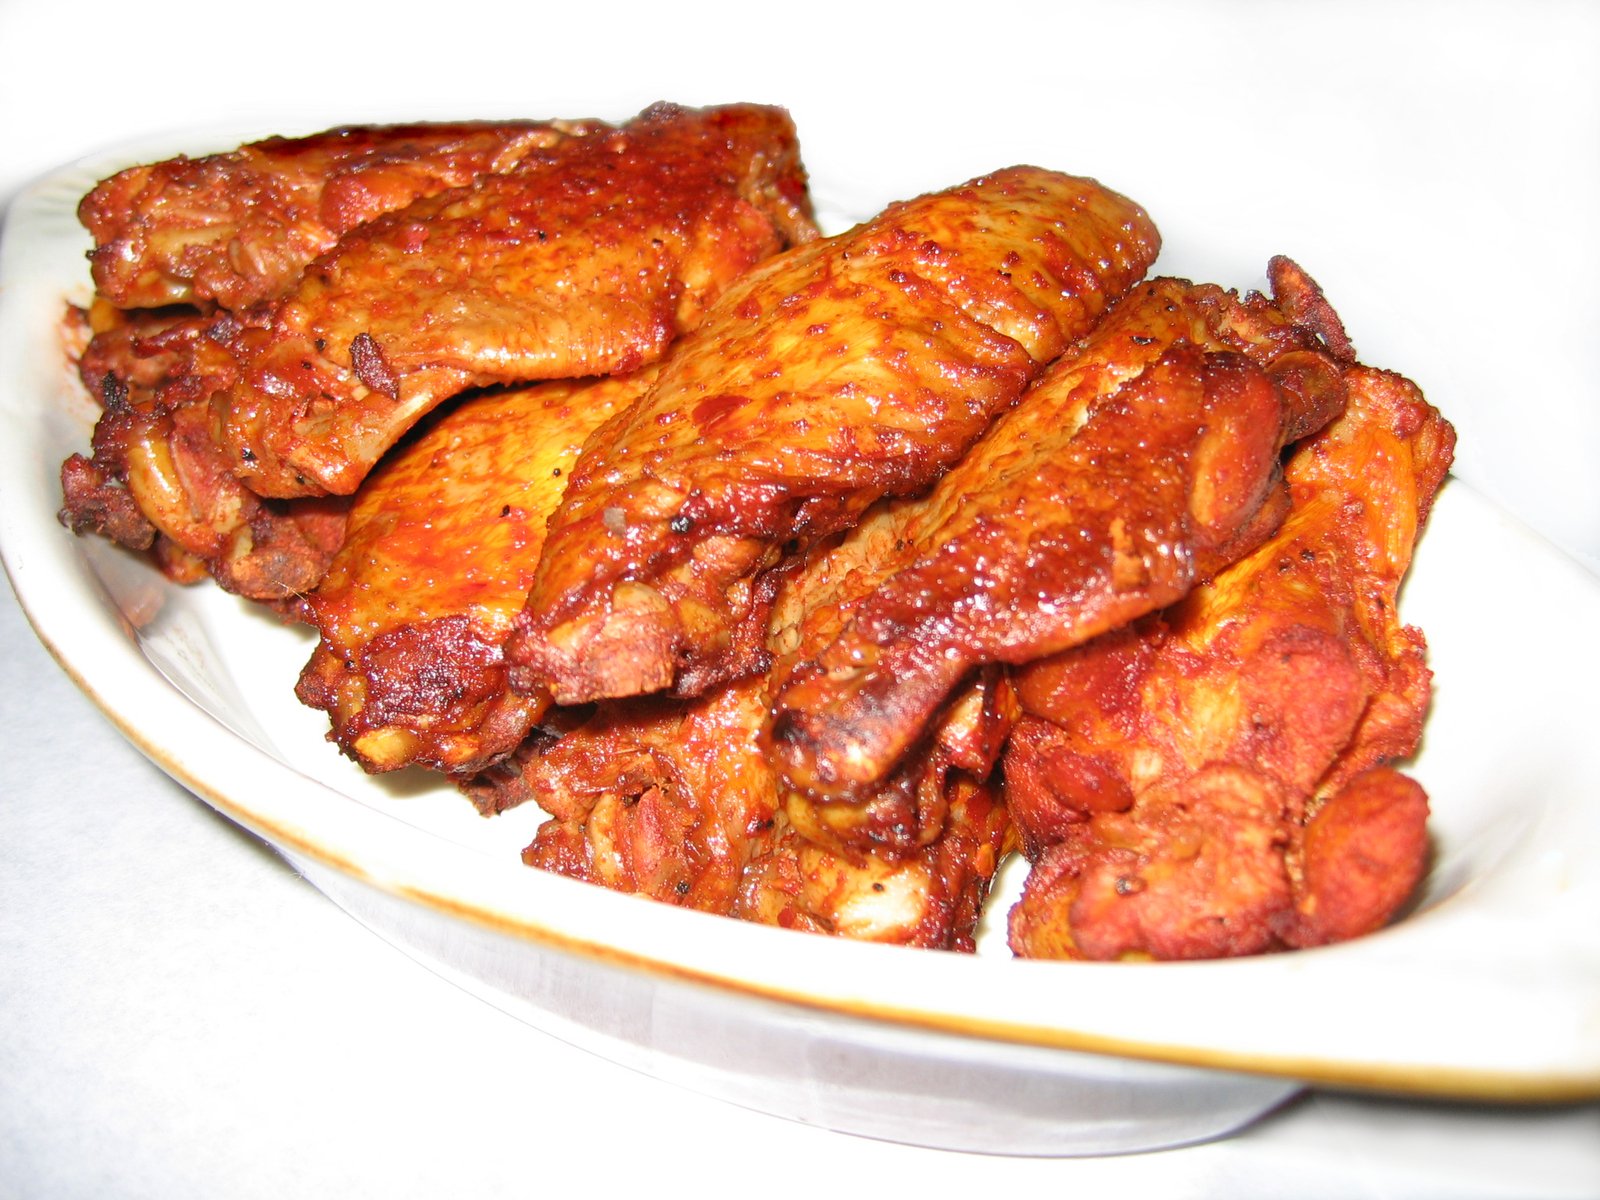 pieces of cooked meat in a white bowl